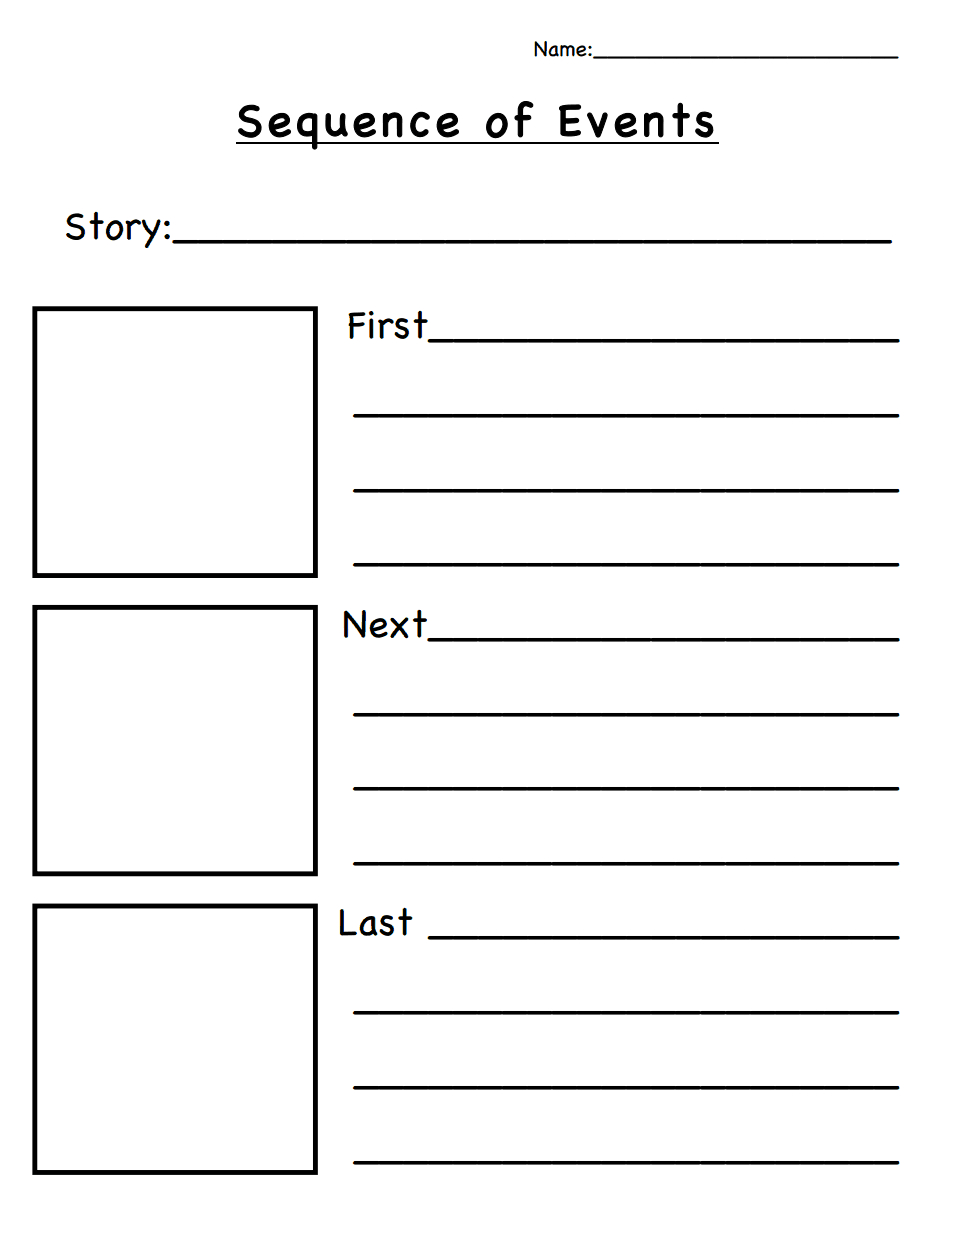 Sequence Of Events.pdf | Sequencing Worksheets, Story